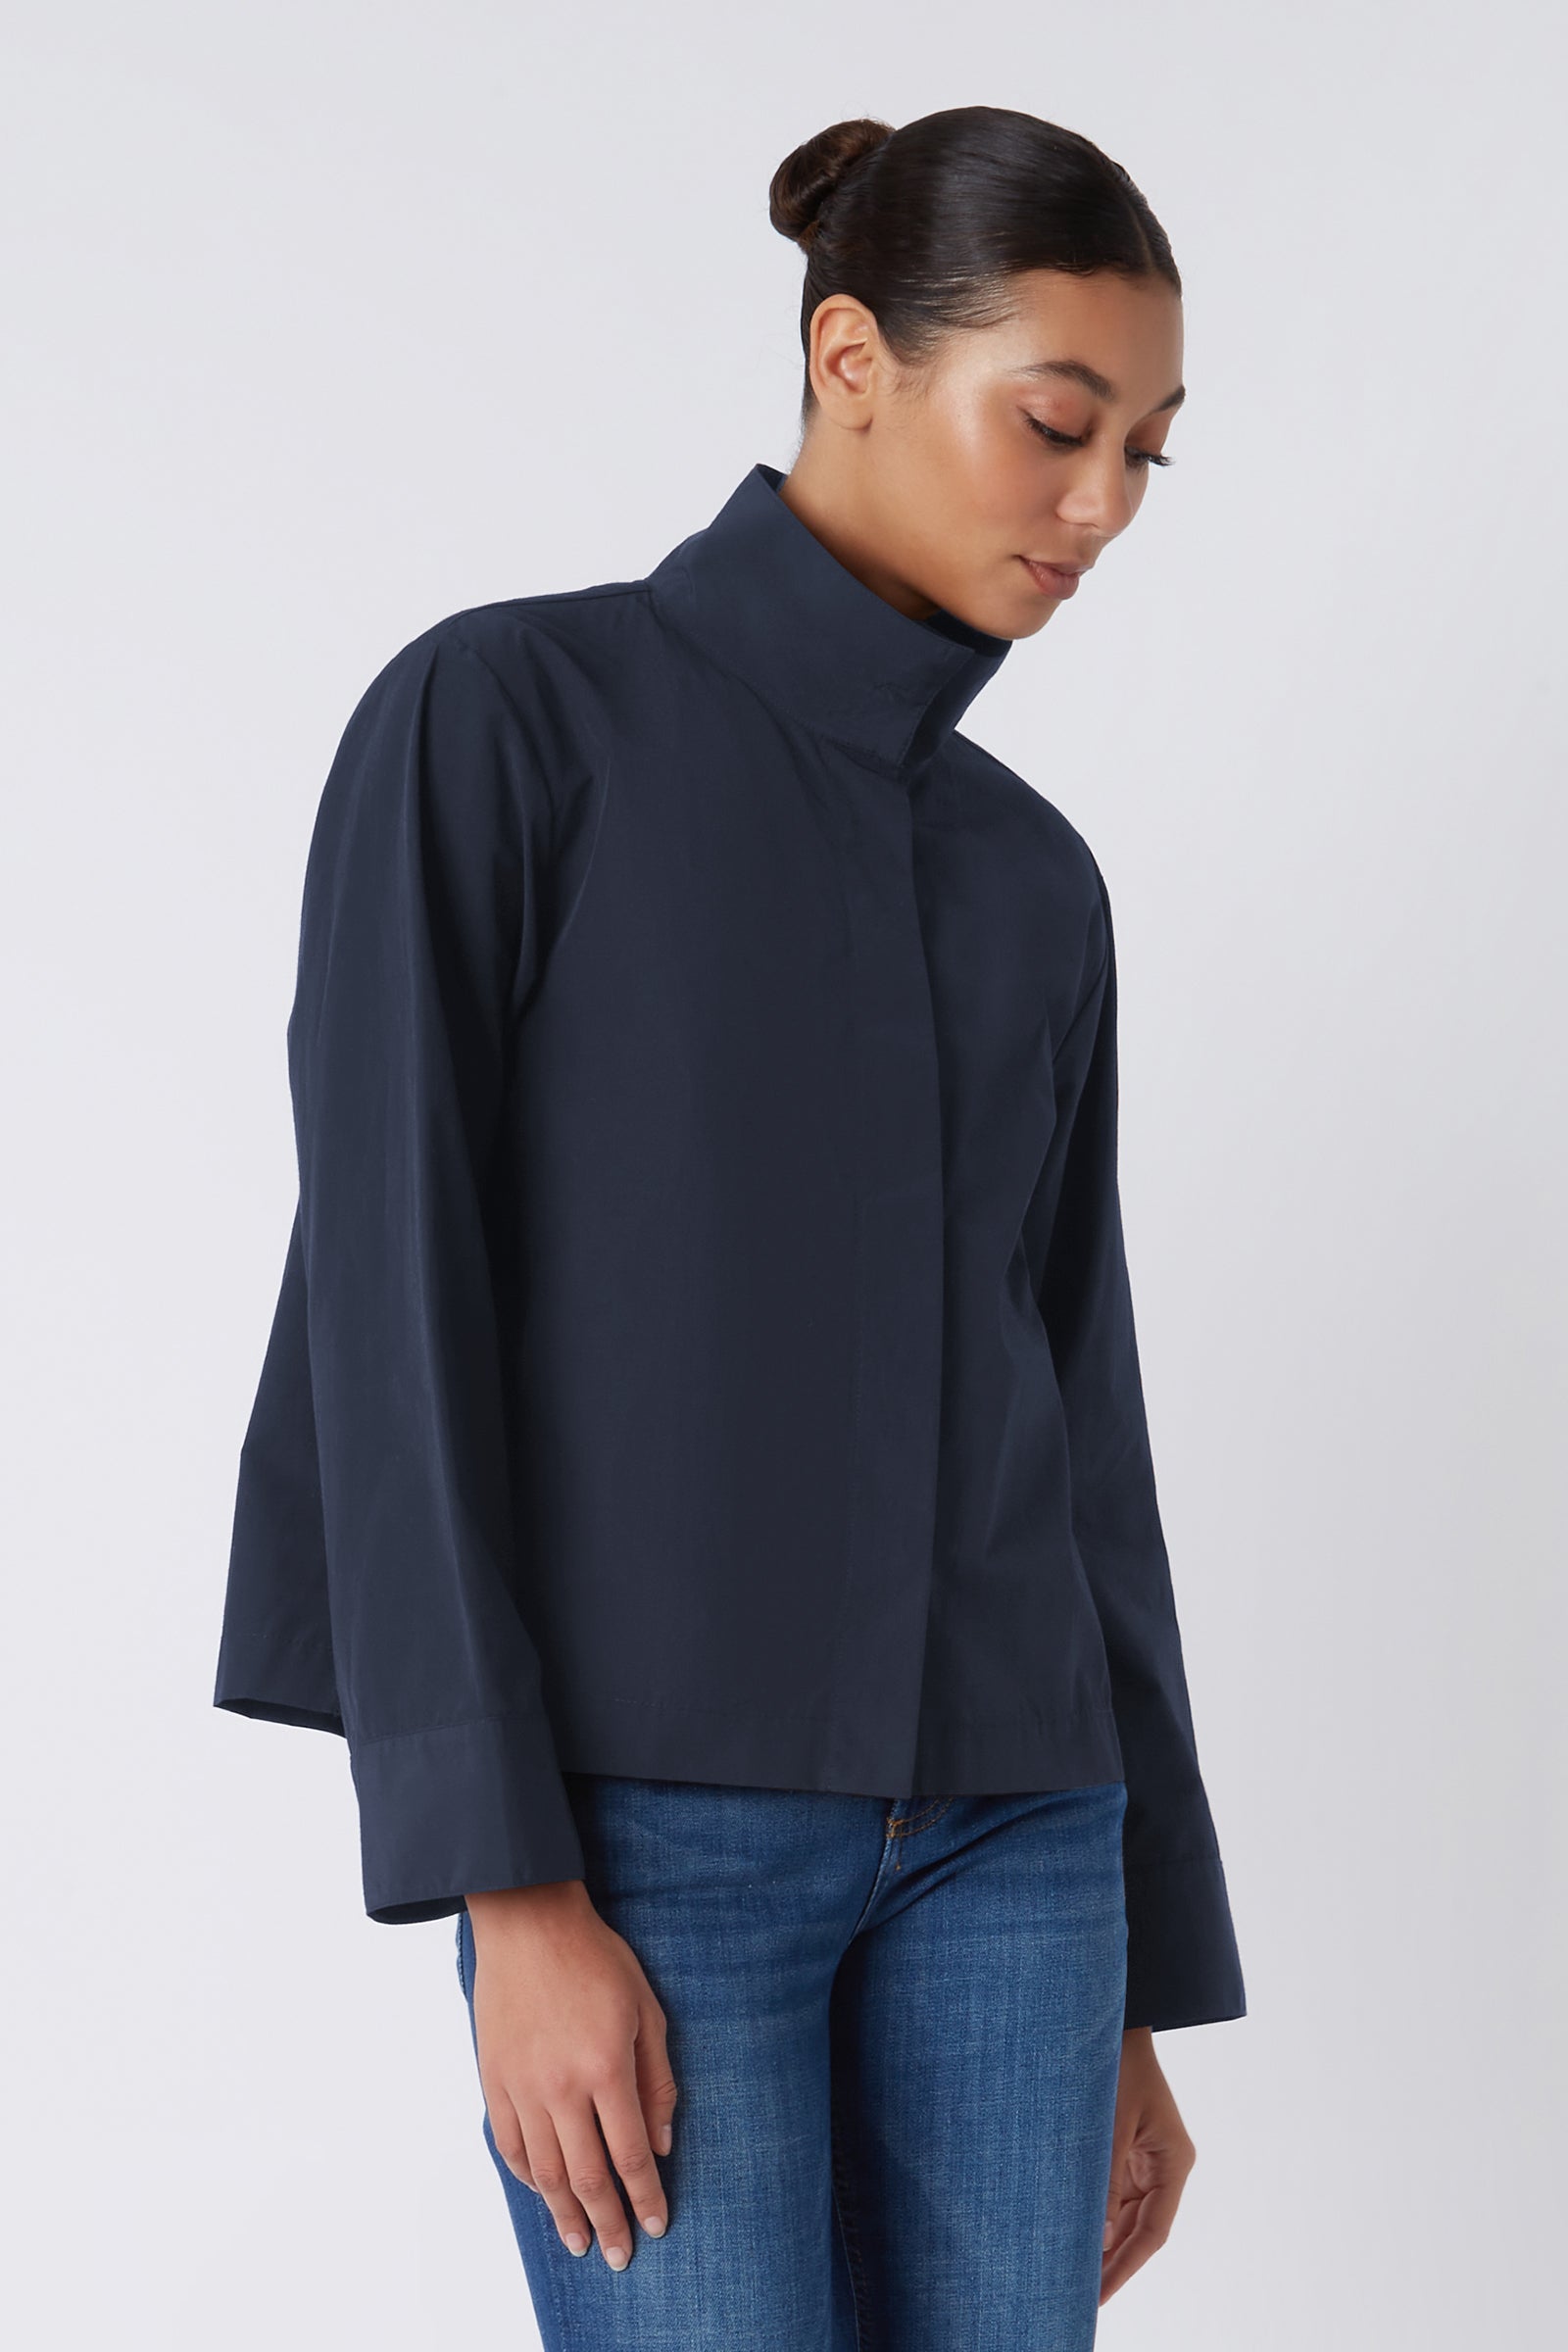 Kal Rieman Peggy Collared Shirt in Navy Broadcloth on Model Looking Down Cropped Front View